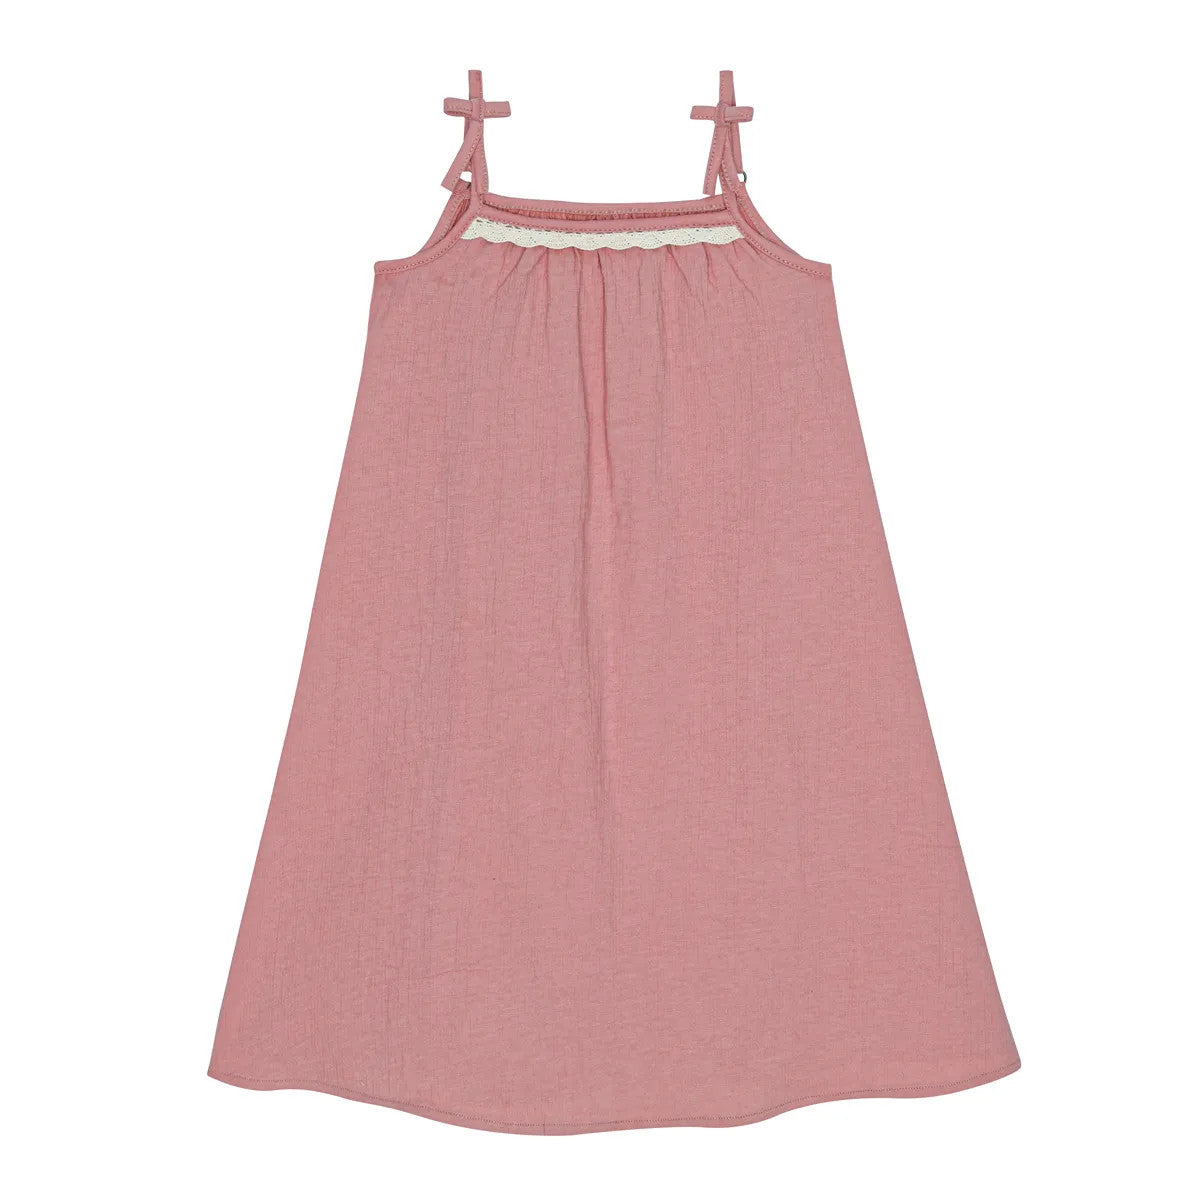 Little Hedonist light beach dress in coral. The must have beach dress for girls! Sustainable kids clothing made from organic cotton.